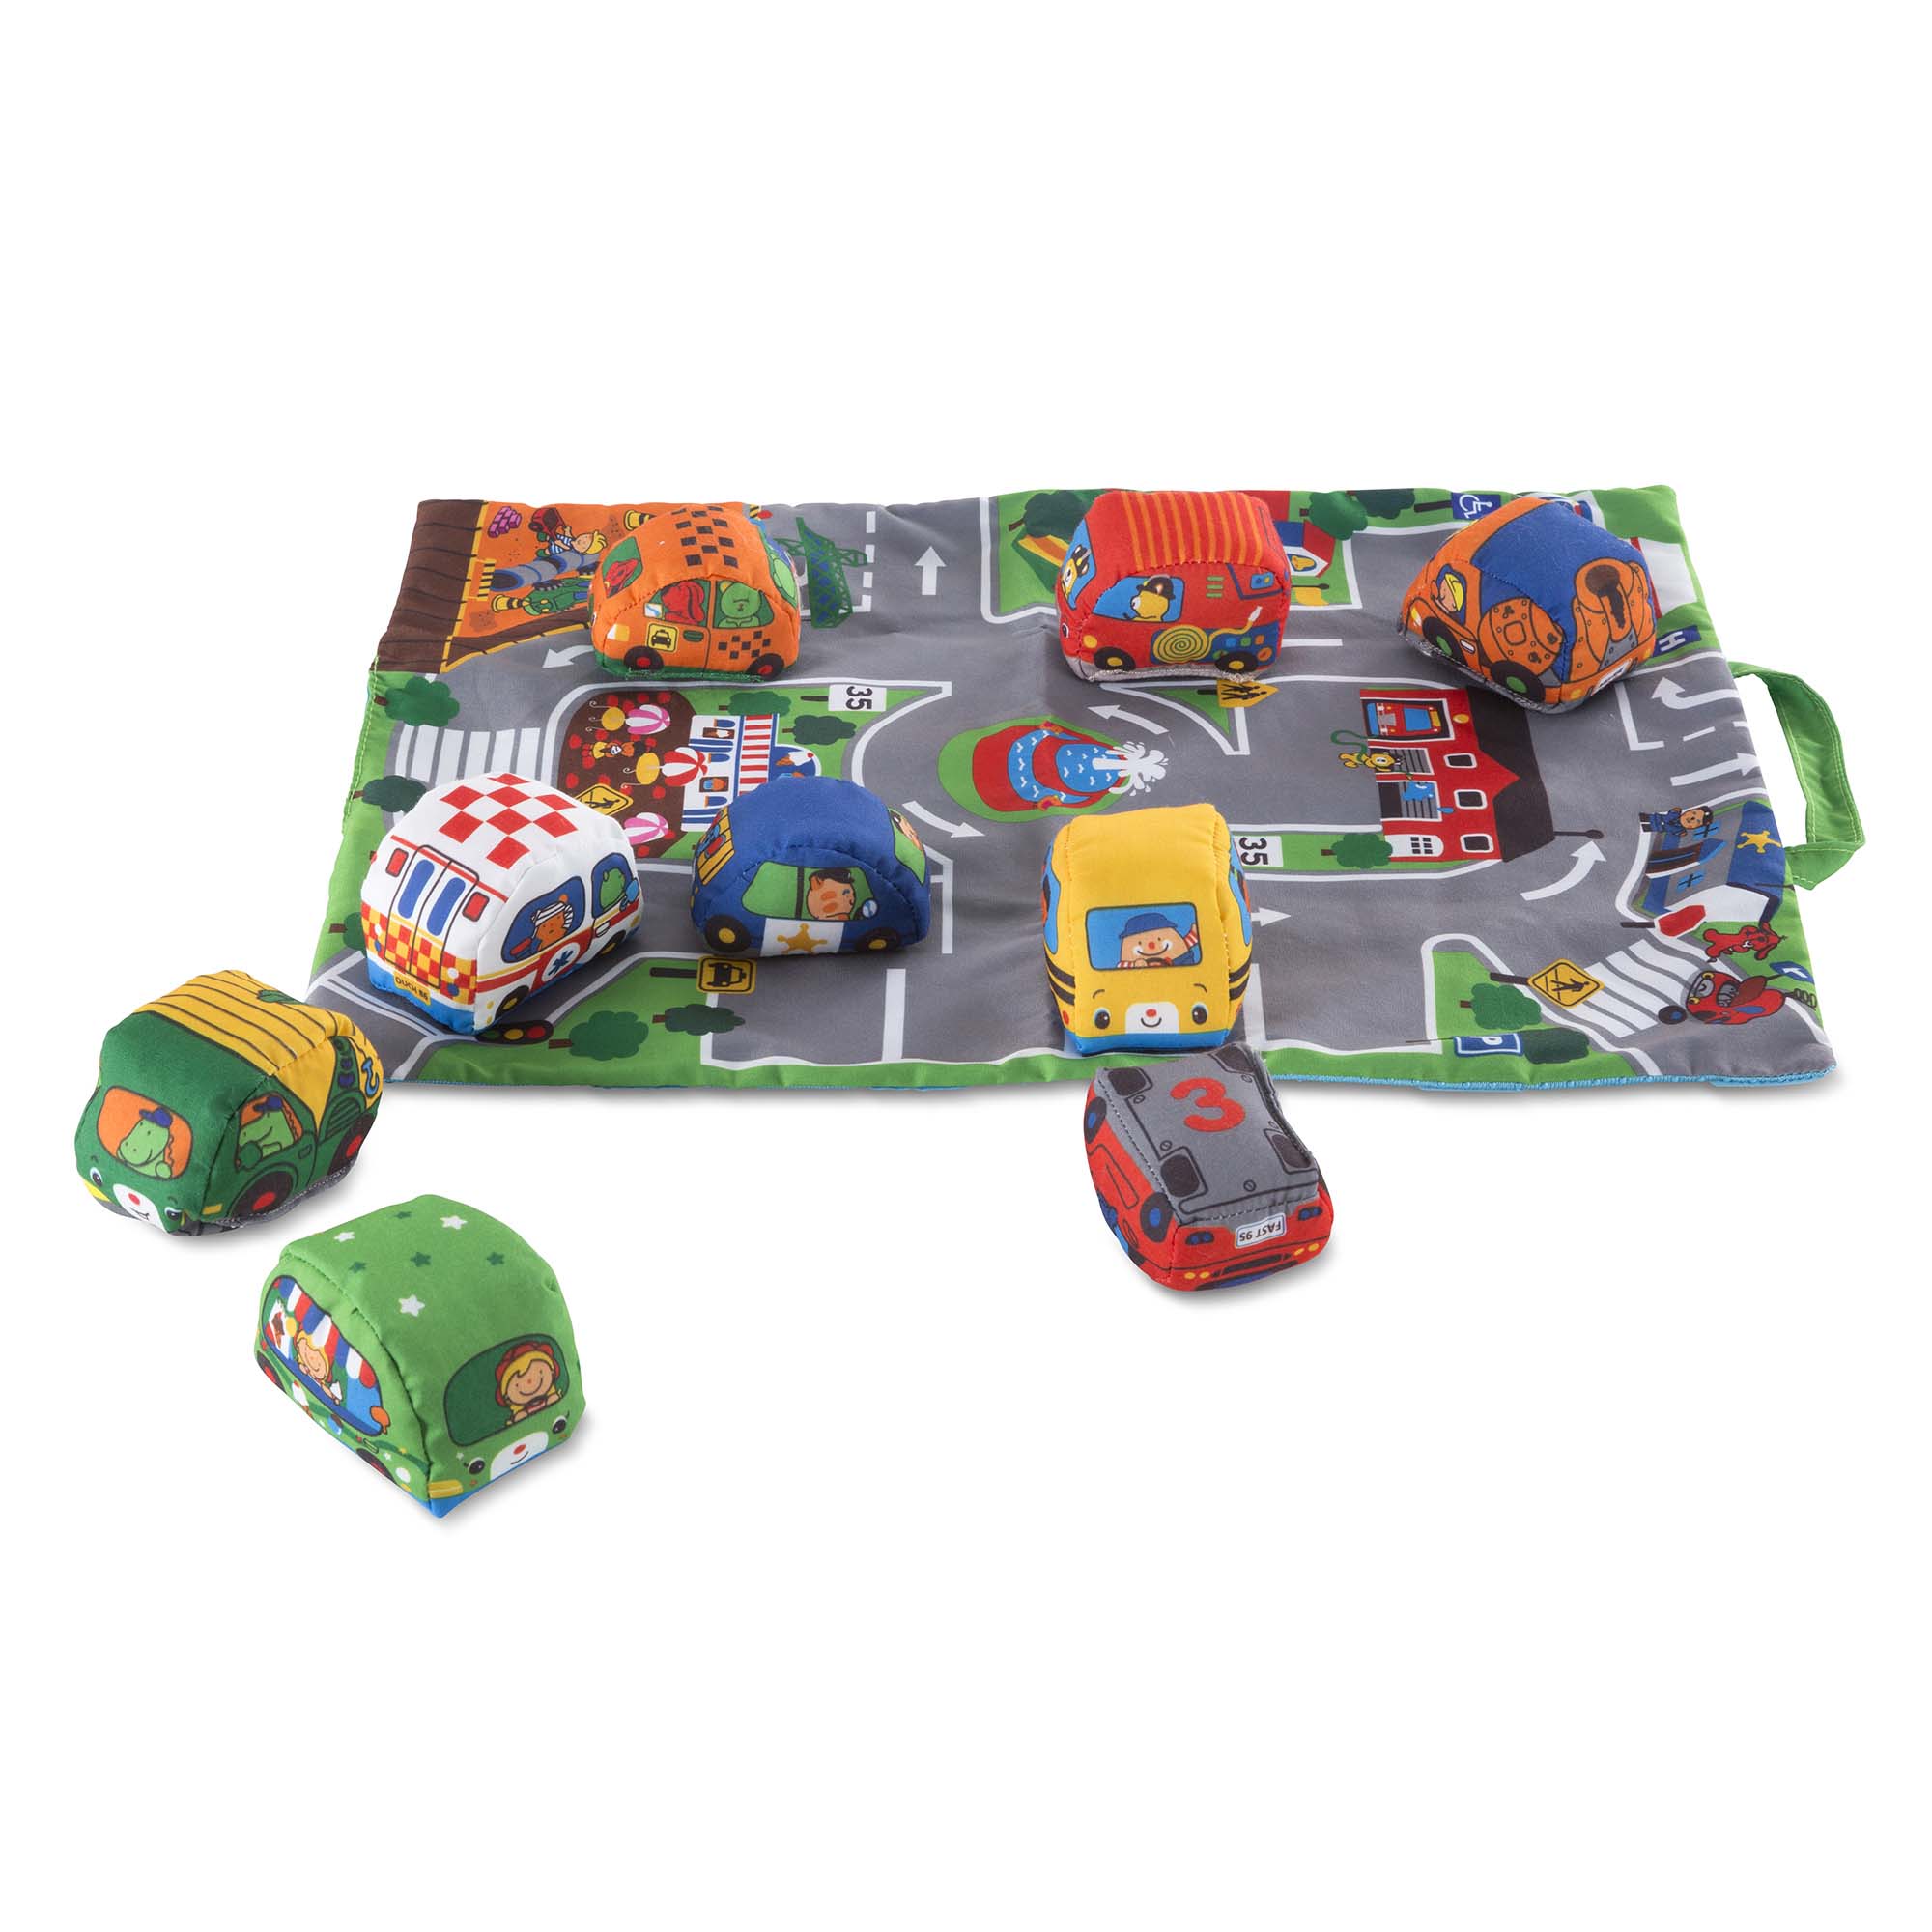 Melissa & Doug Take-Along Town Play Mat image number null